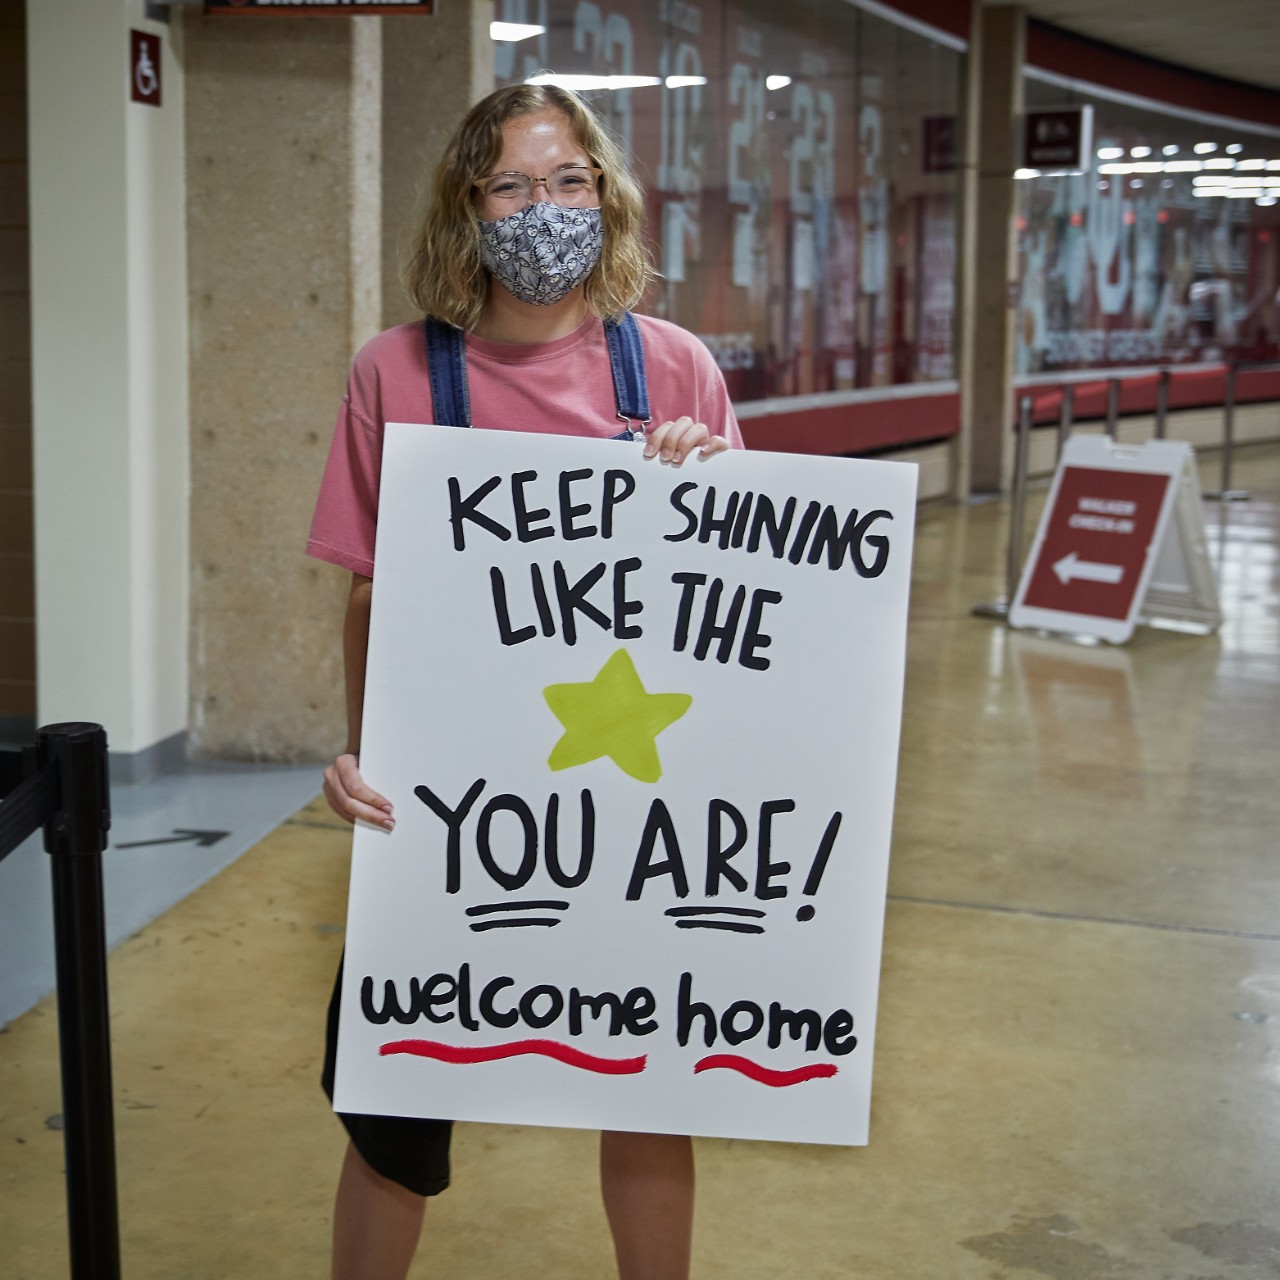 Masked student holds up a hand made sign reading "keep shining like the star you are! welcome home"